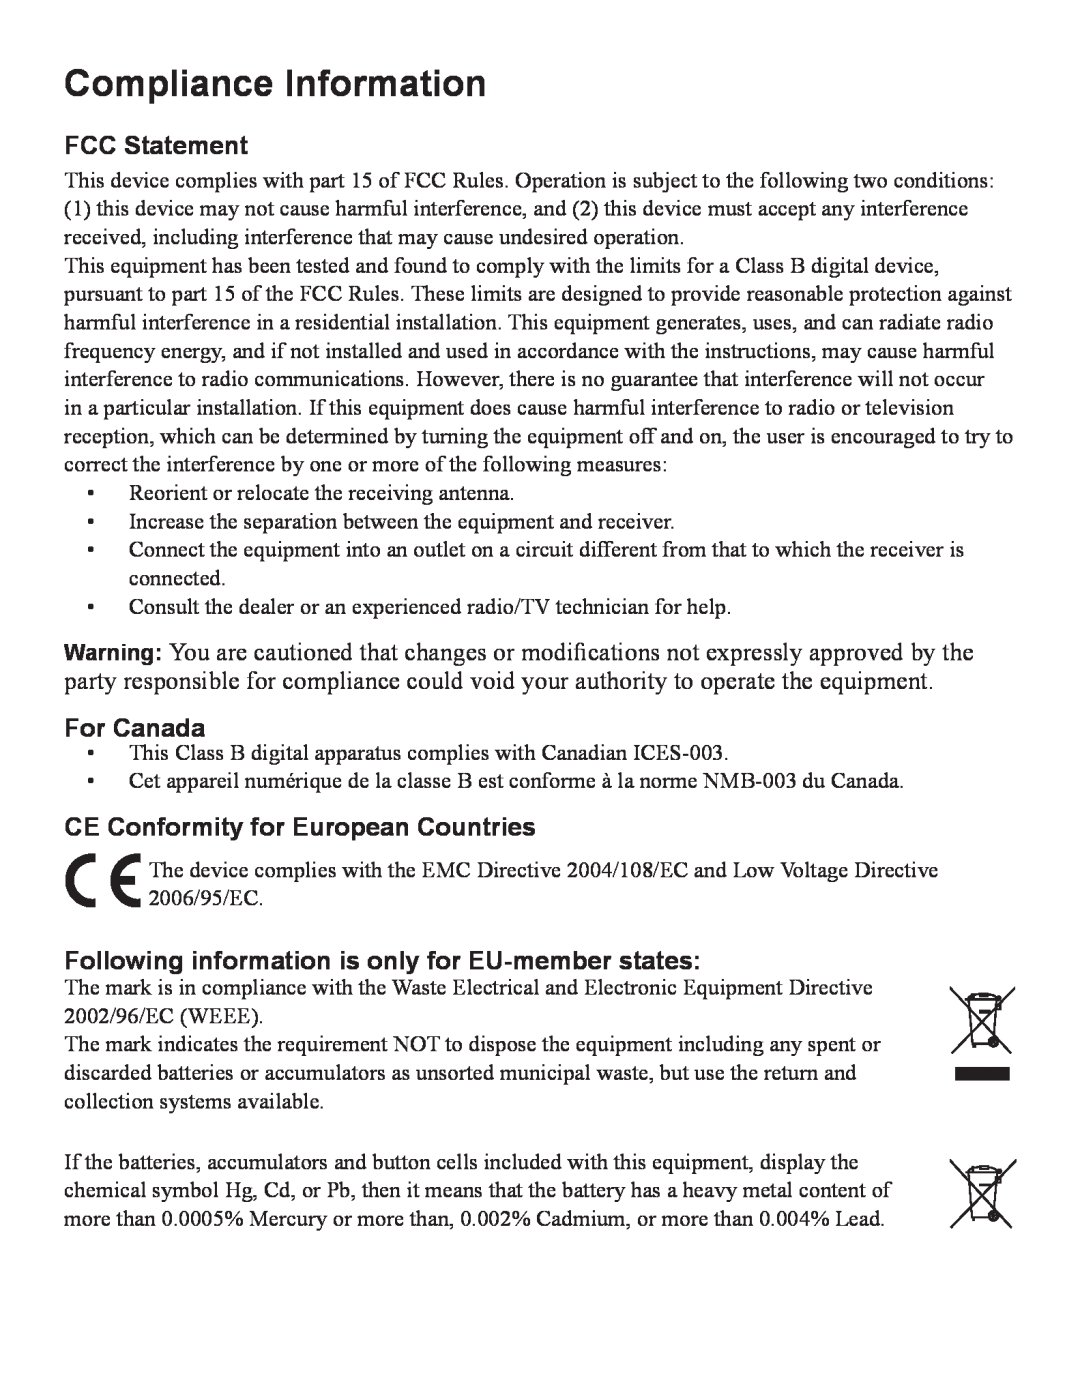 ViewSonic PJD6251 warranty Compliance Information, FCC Statement, For Canada, CE Conformity for European Countries 